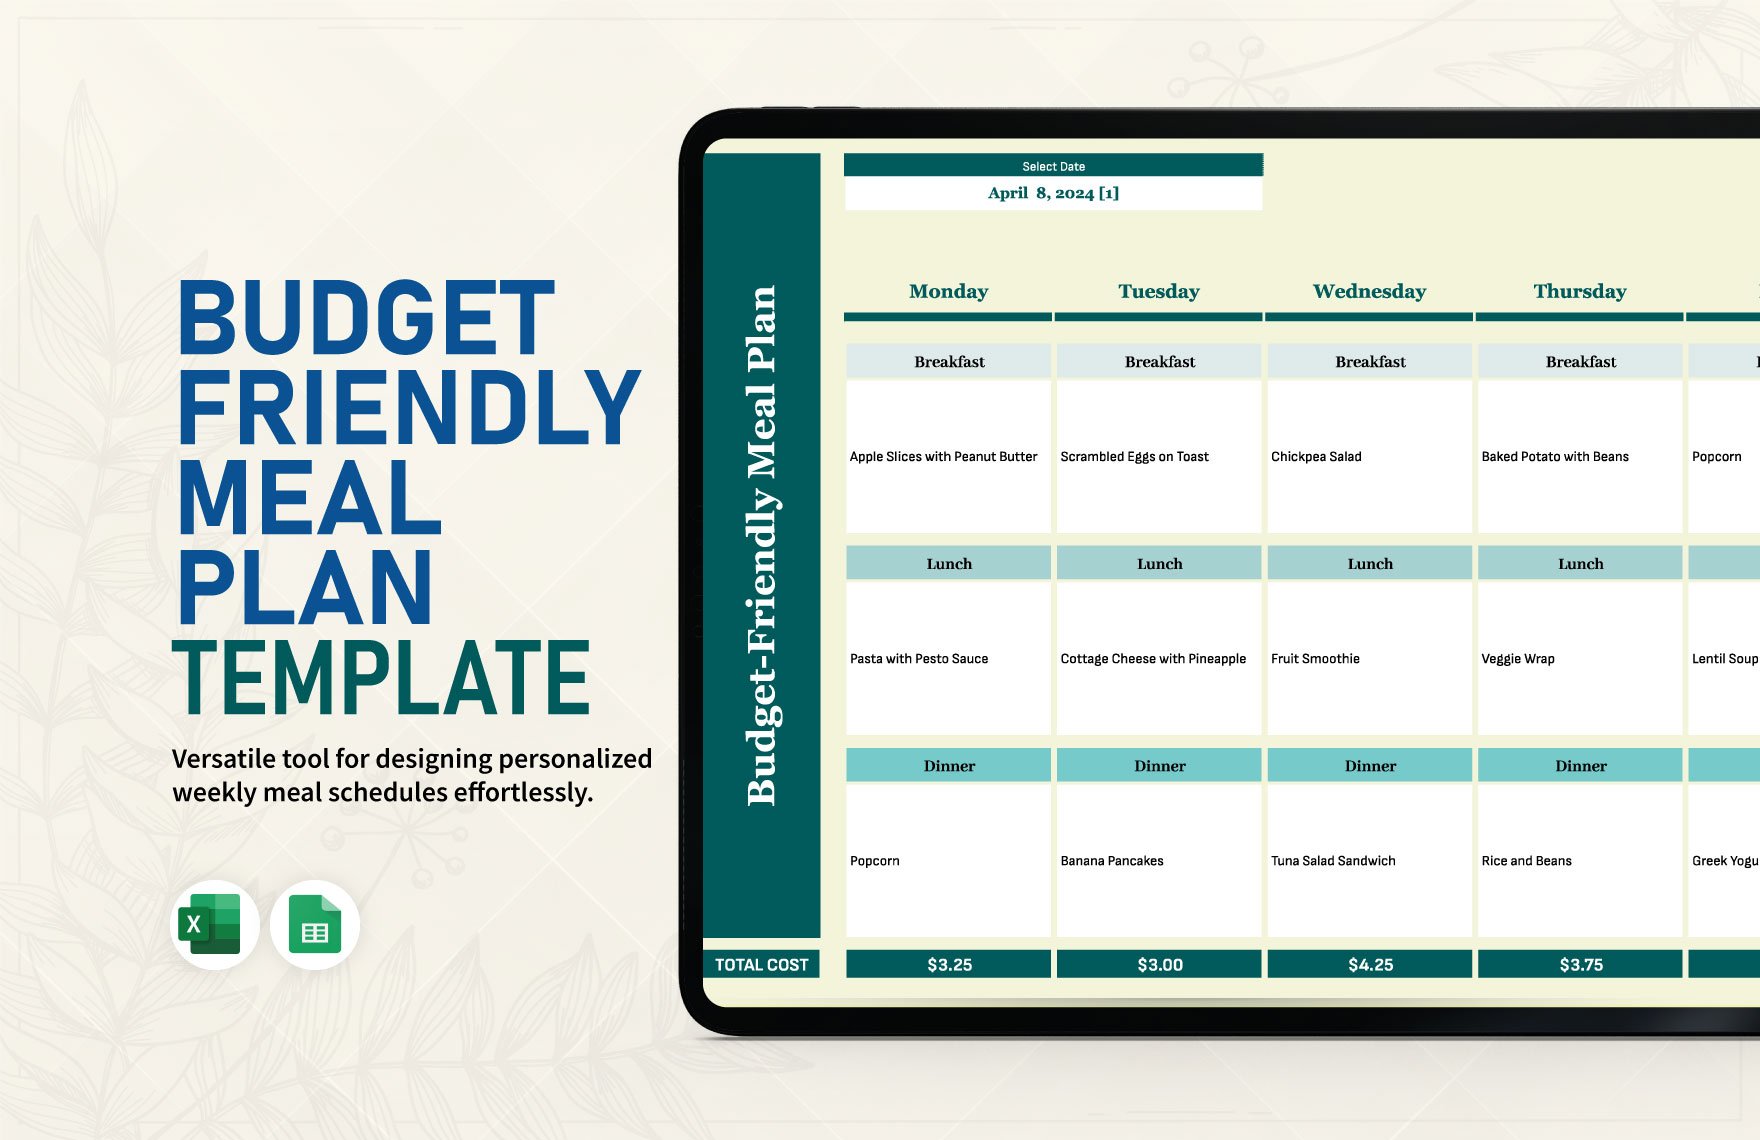 Budget-Friendly Meal Plan Template